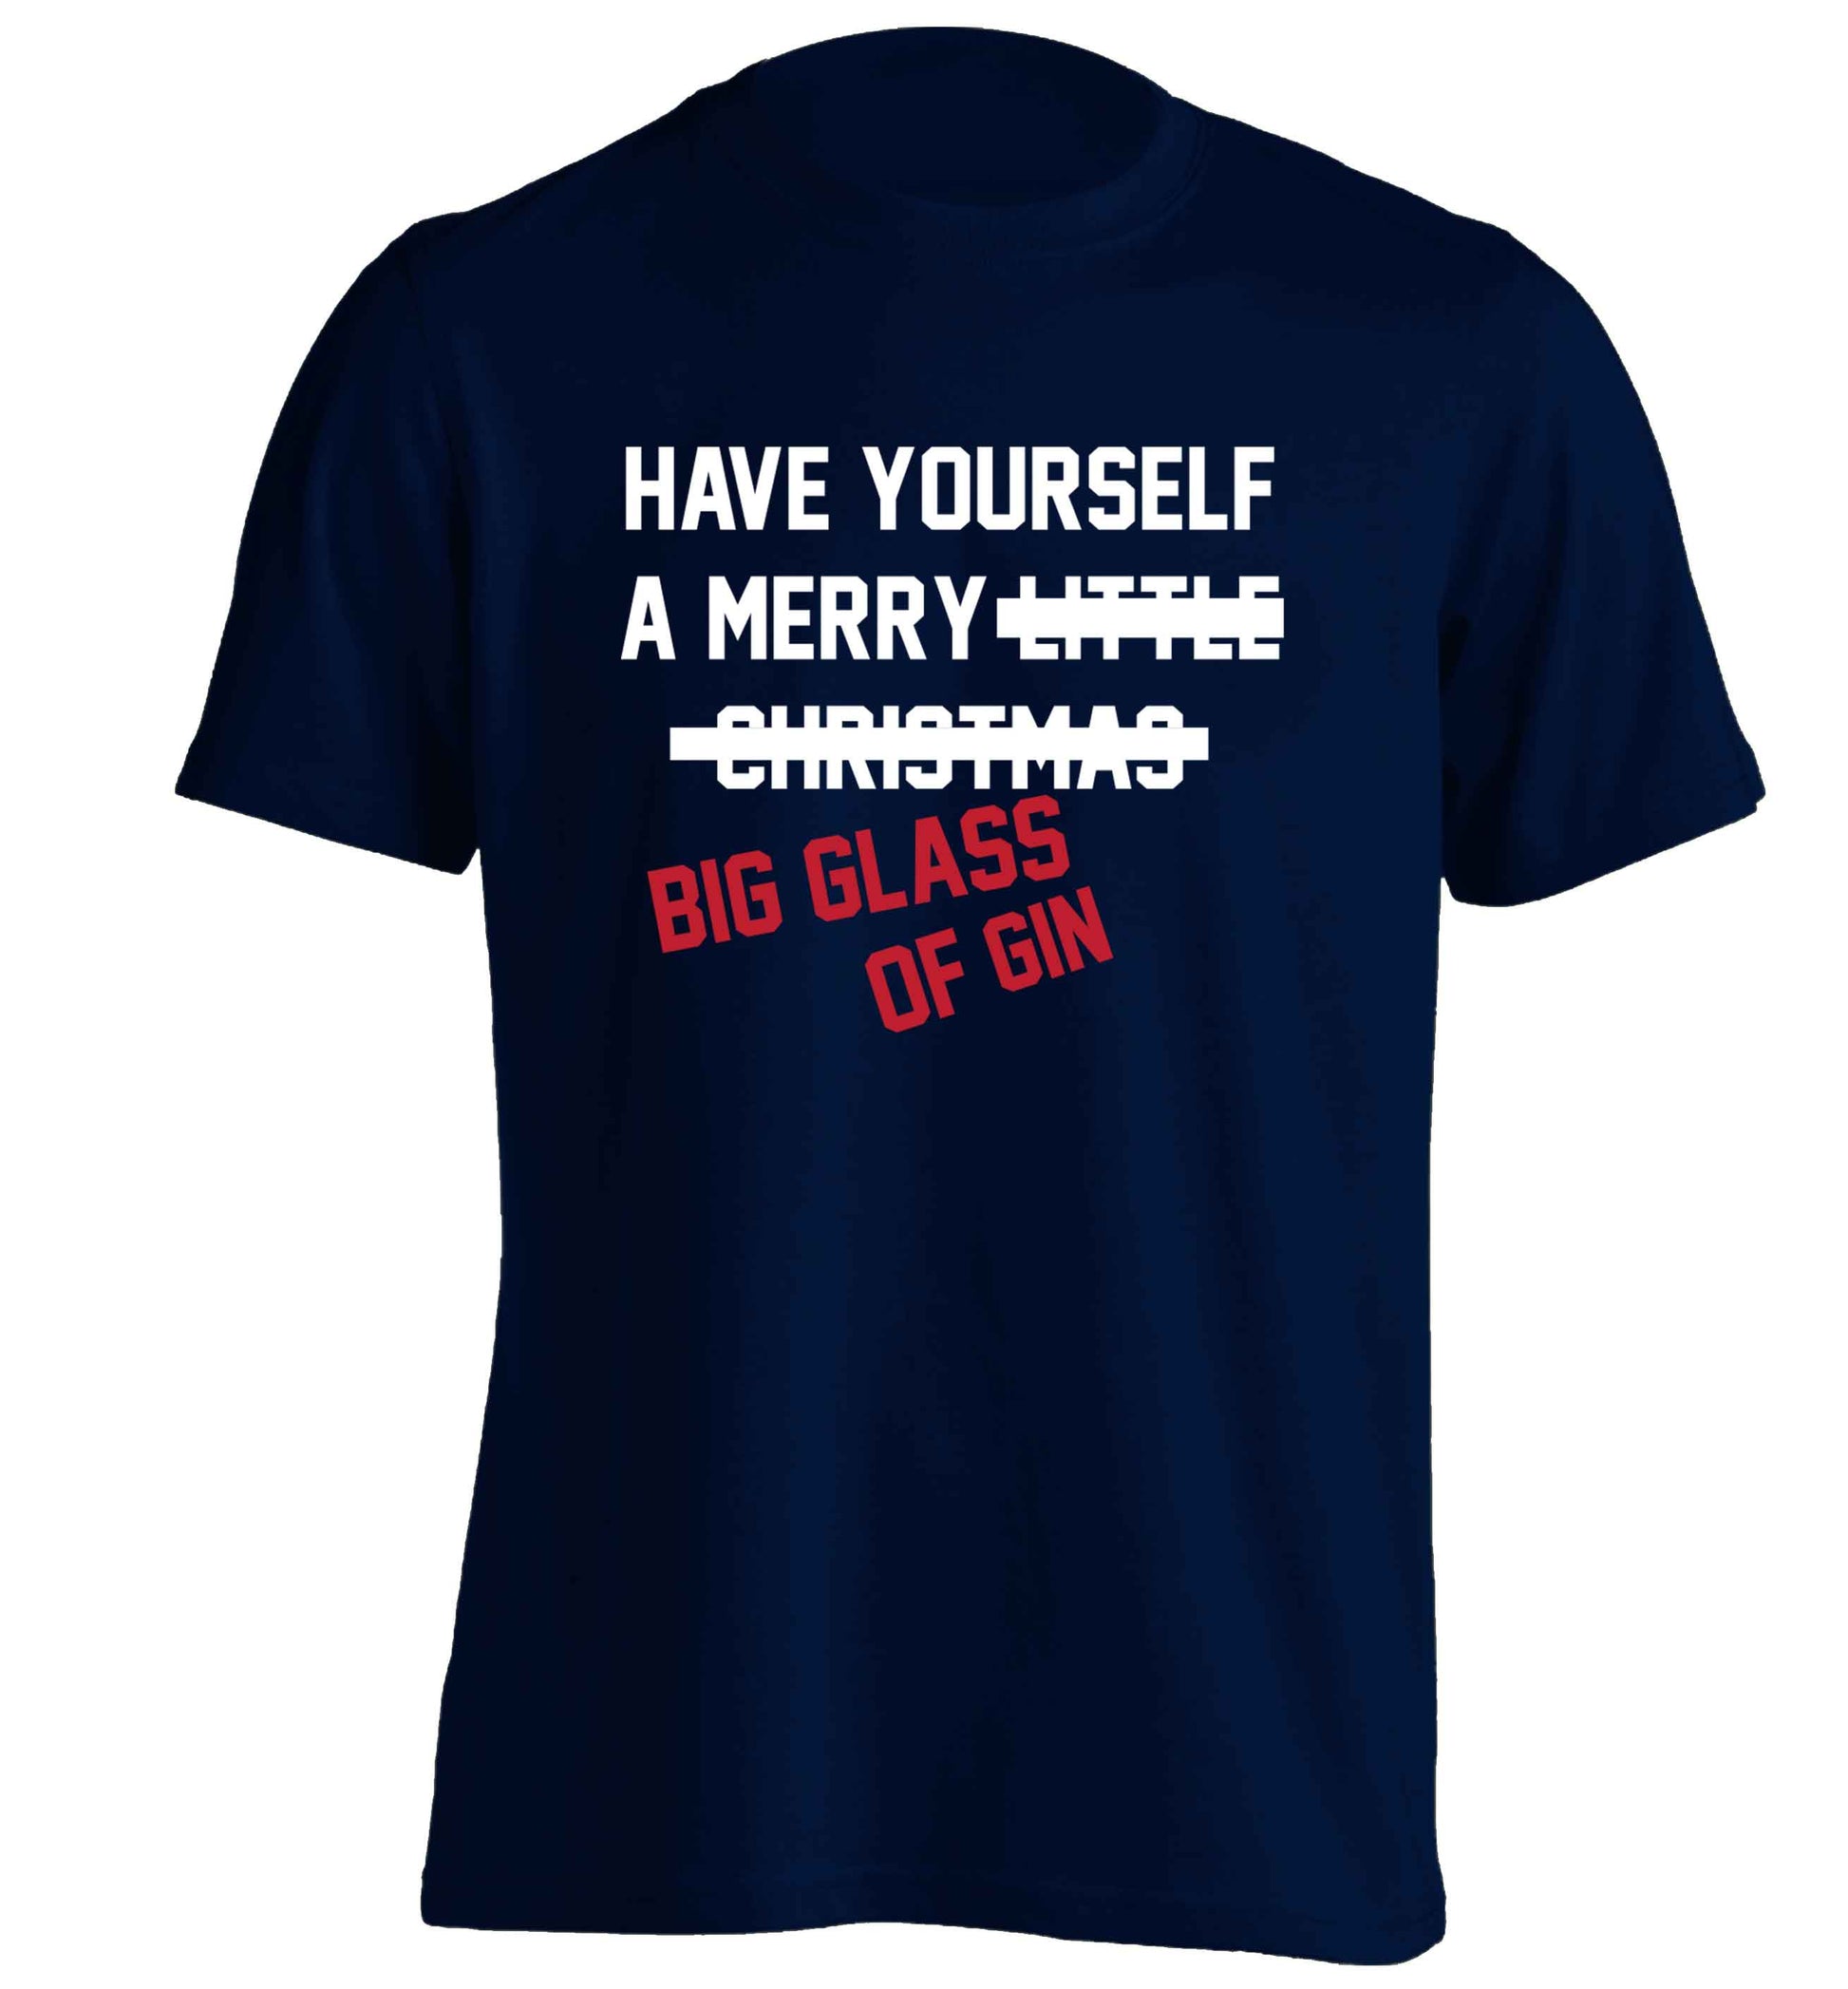 Have yourself a merry big glass of gin adults unisex navy Tshirt 2XL